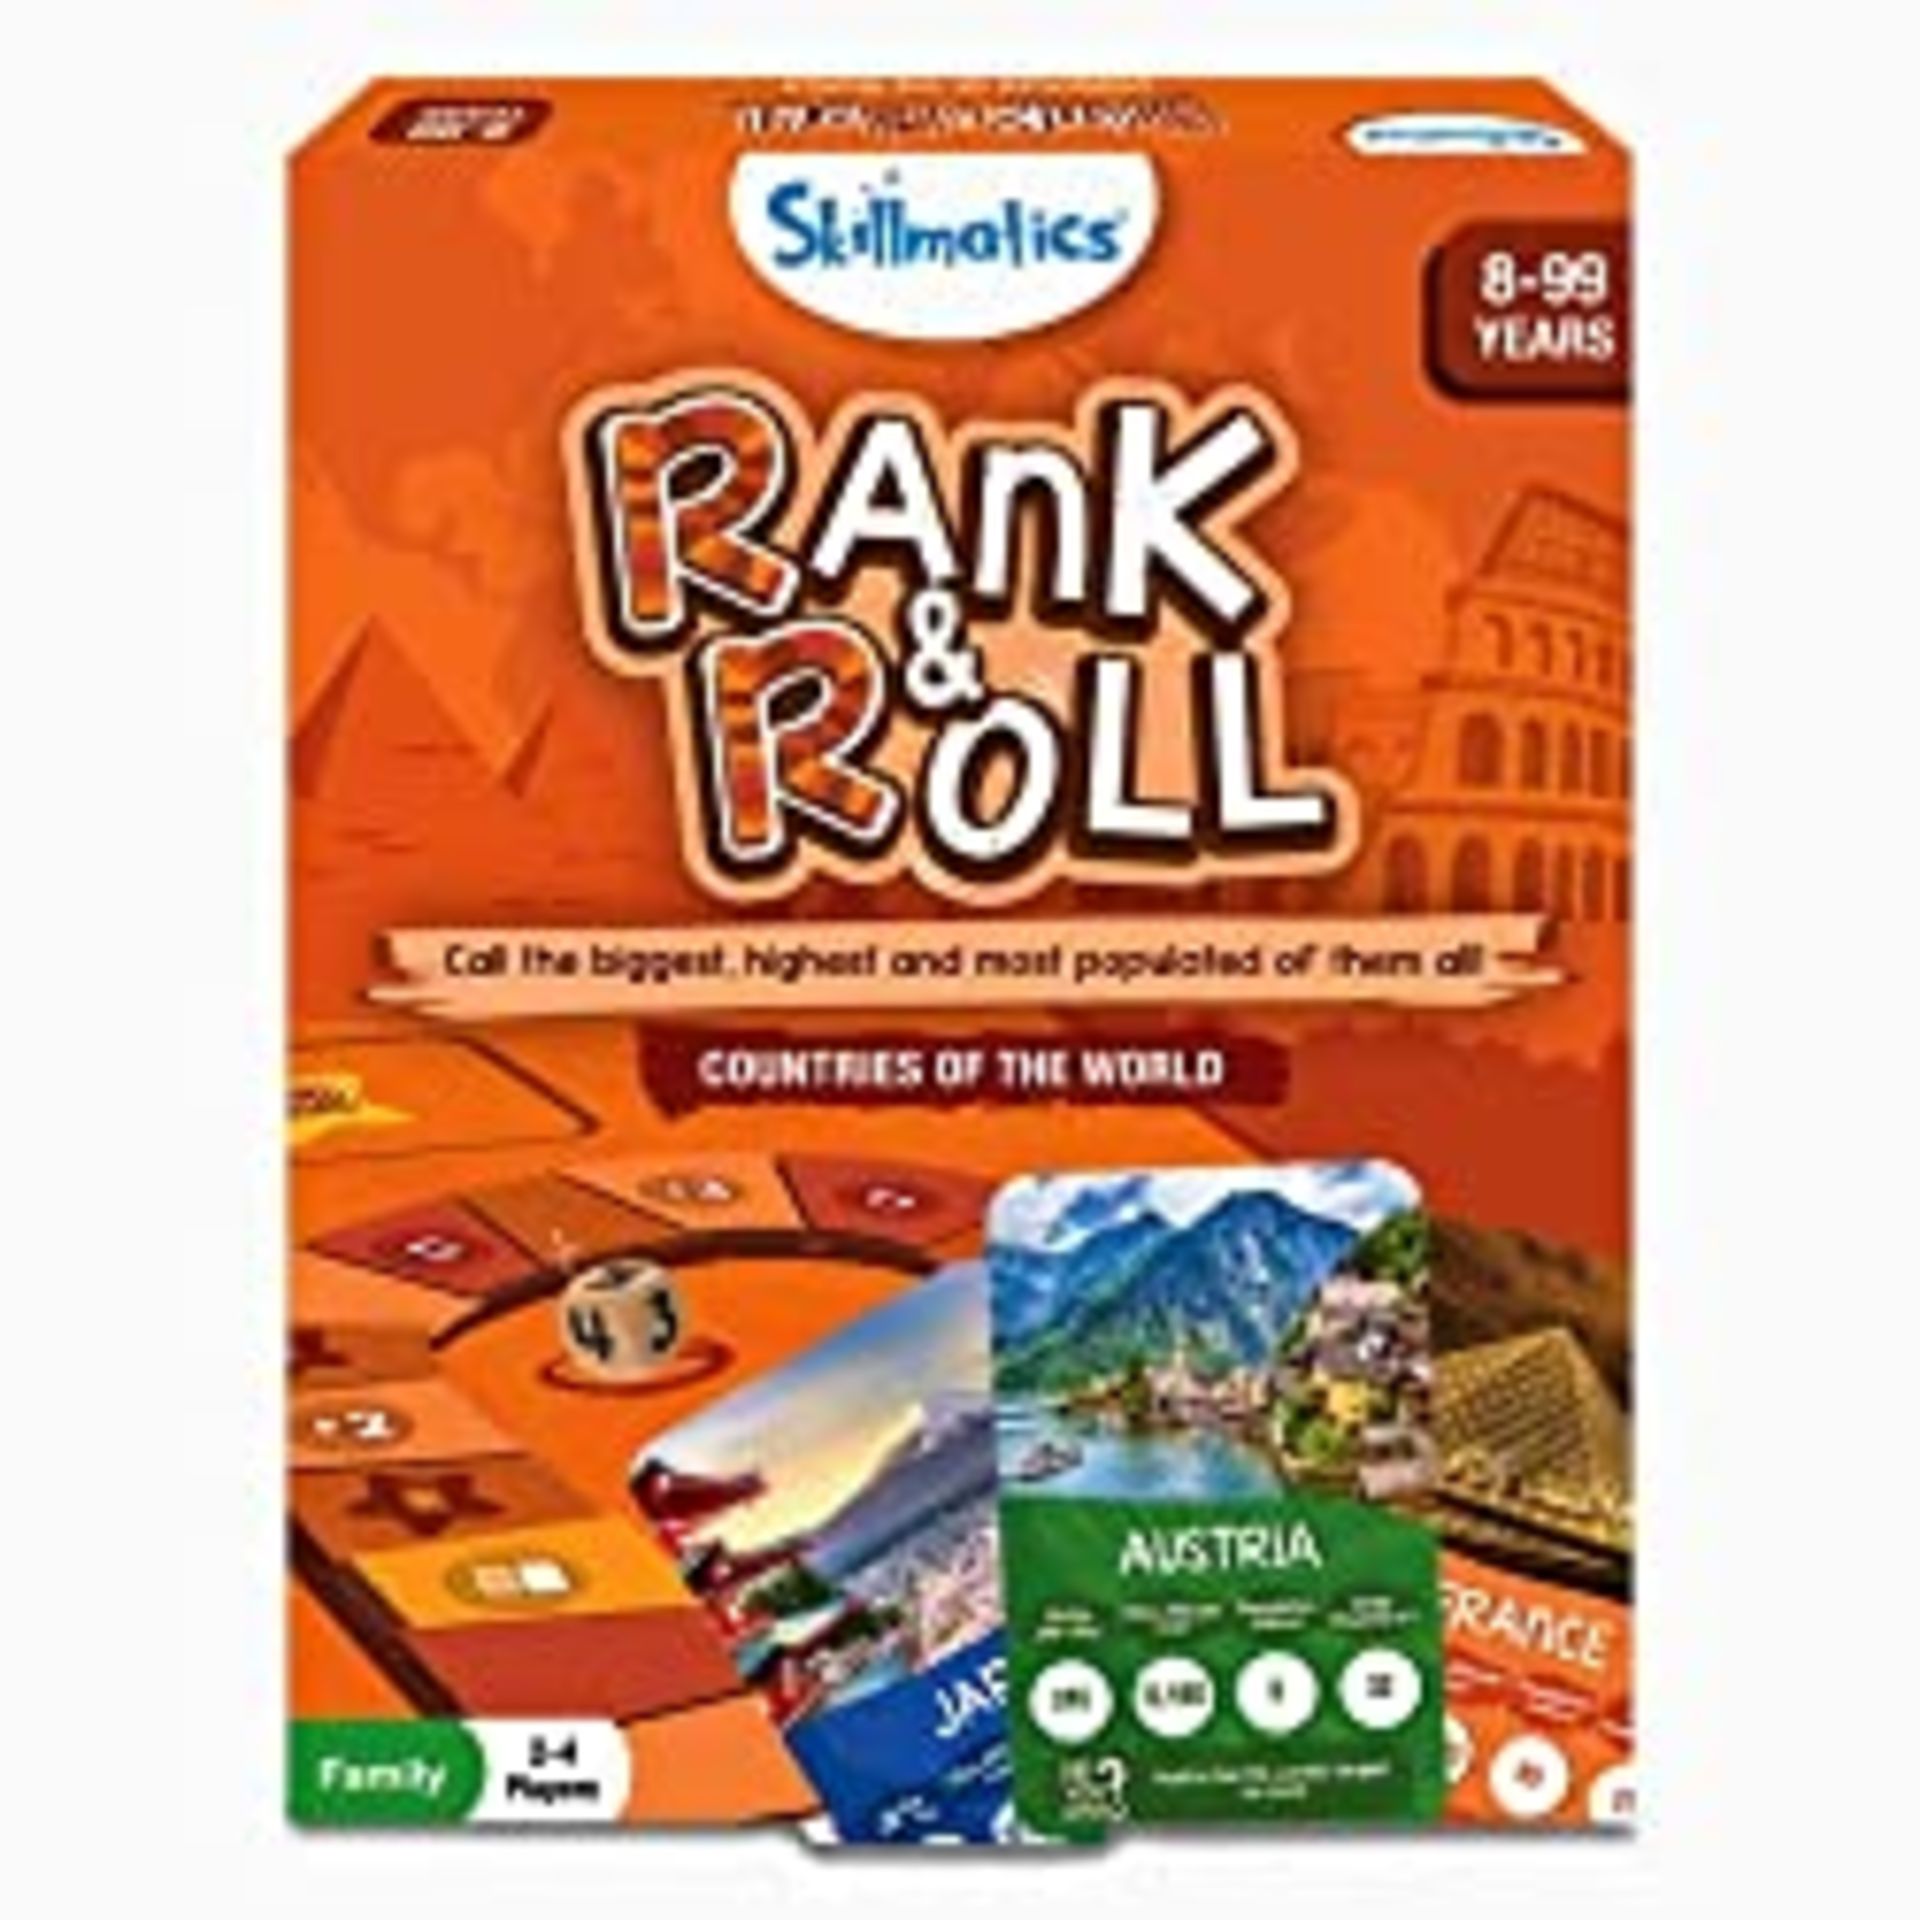 RRP £24.55 Skillmatics Trump Card & Board Game - Rank & Roll Countries of The World